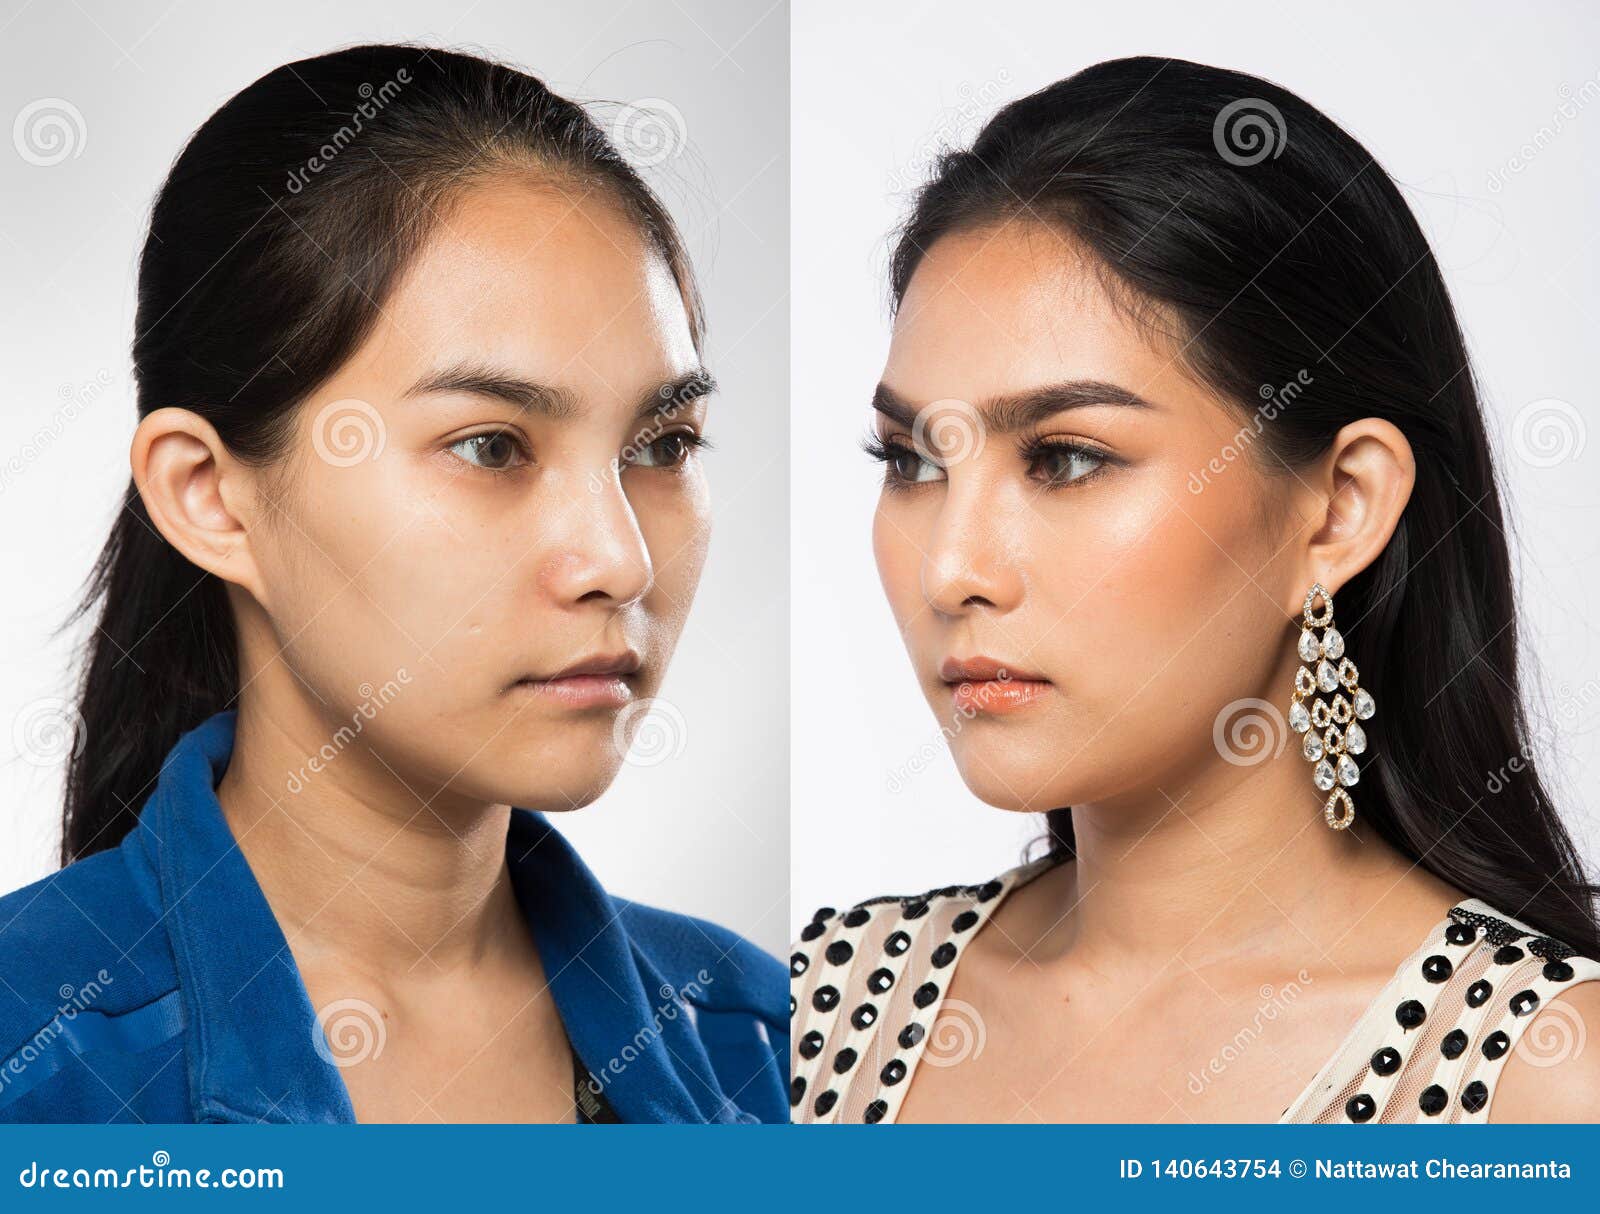 Asian before after Applying Makeup Hairstyle Stock Photo - Image of makeover, hair: